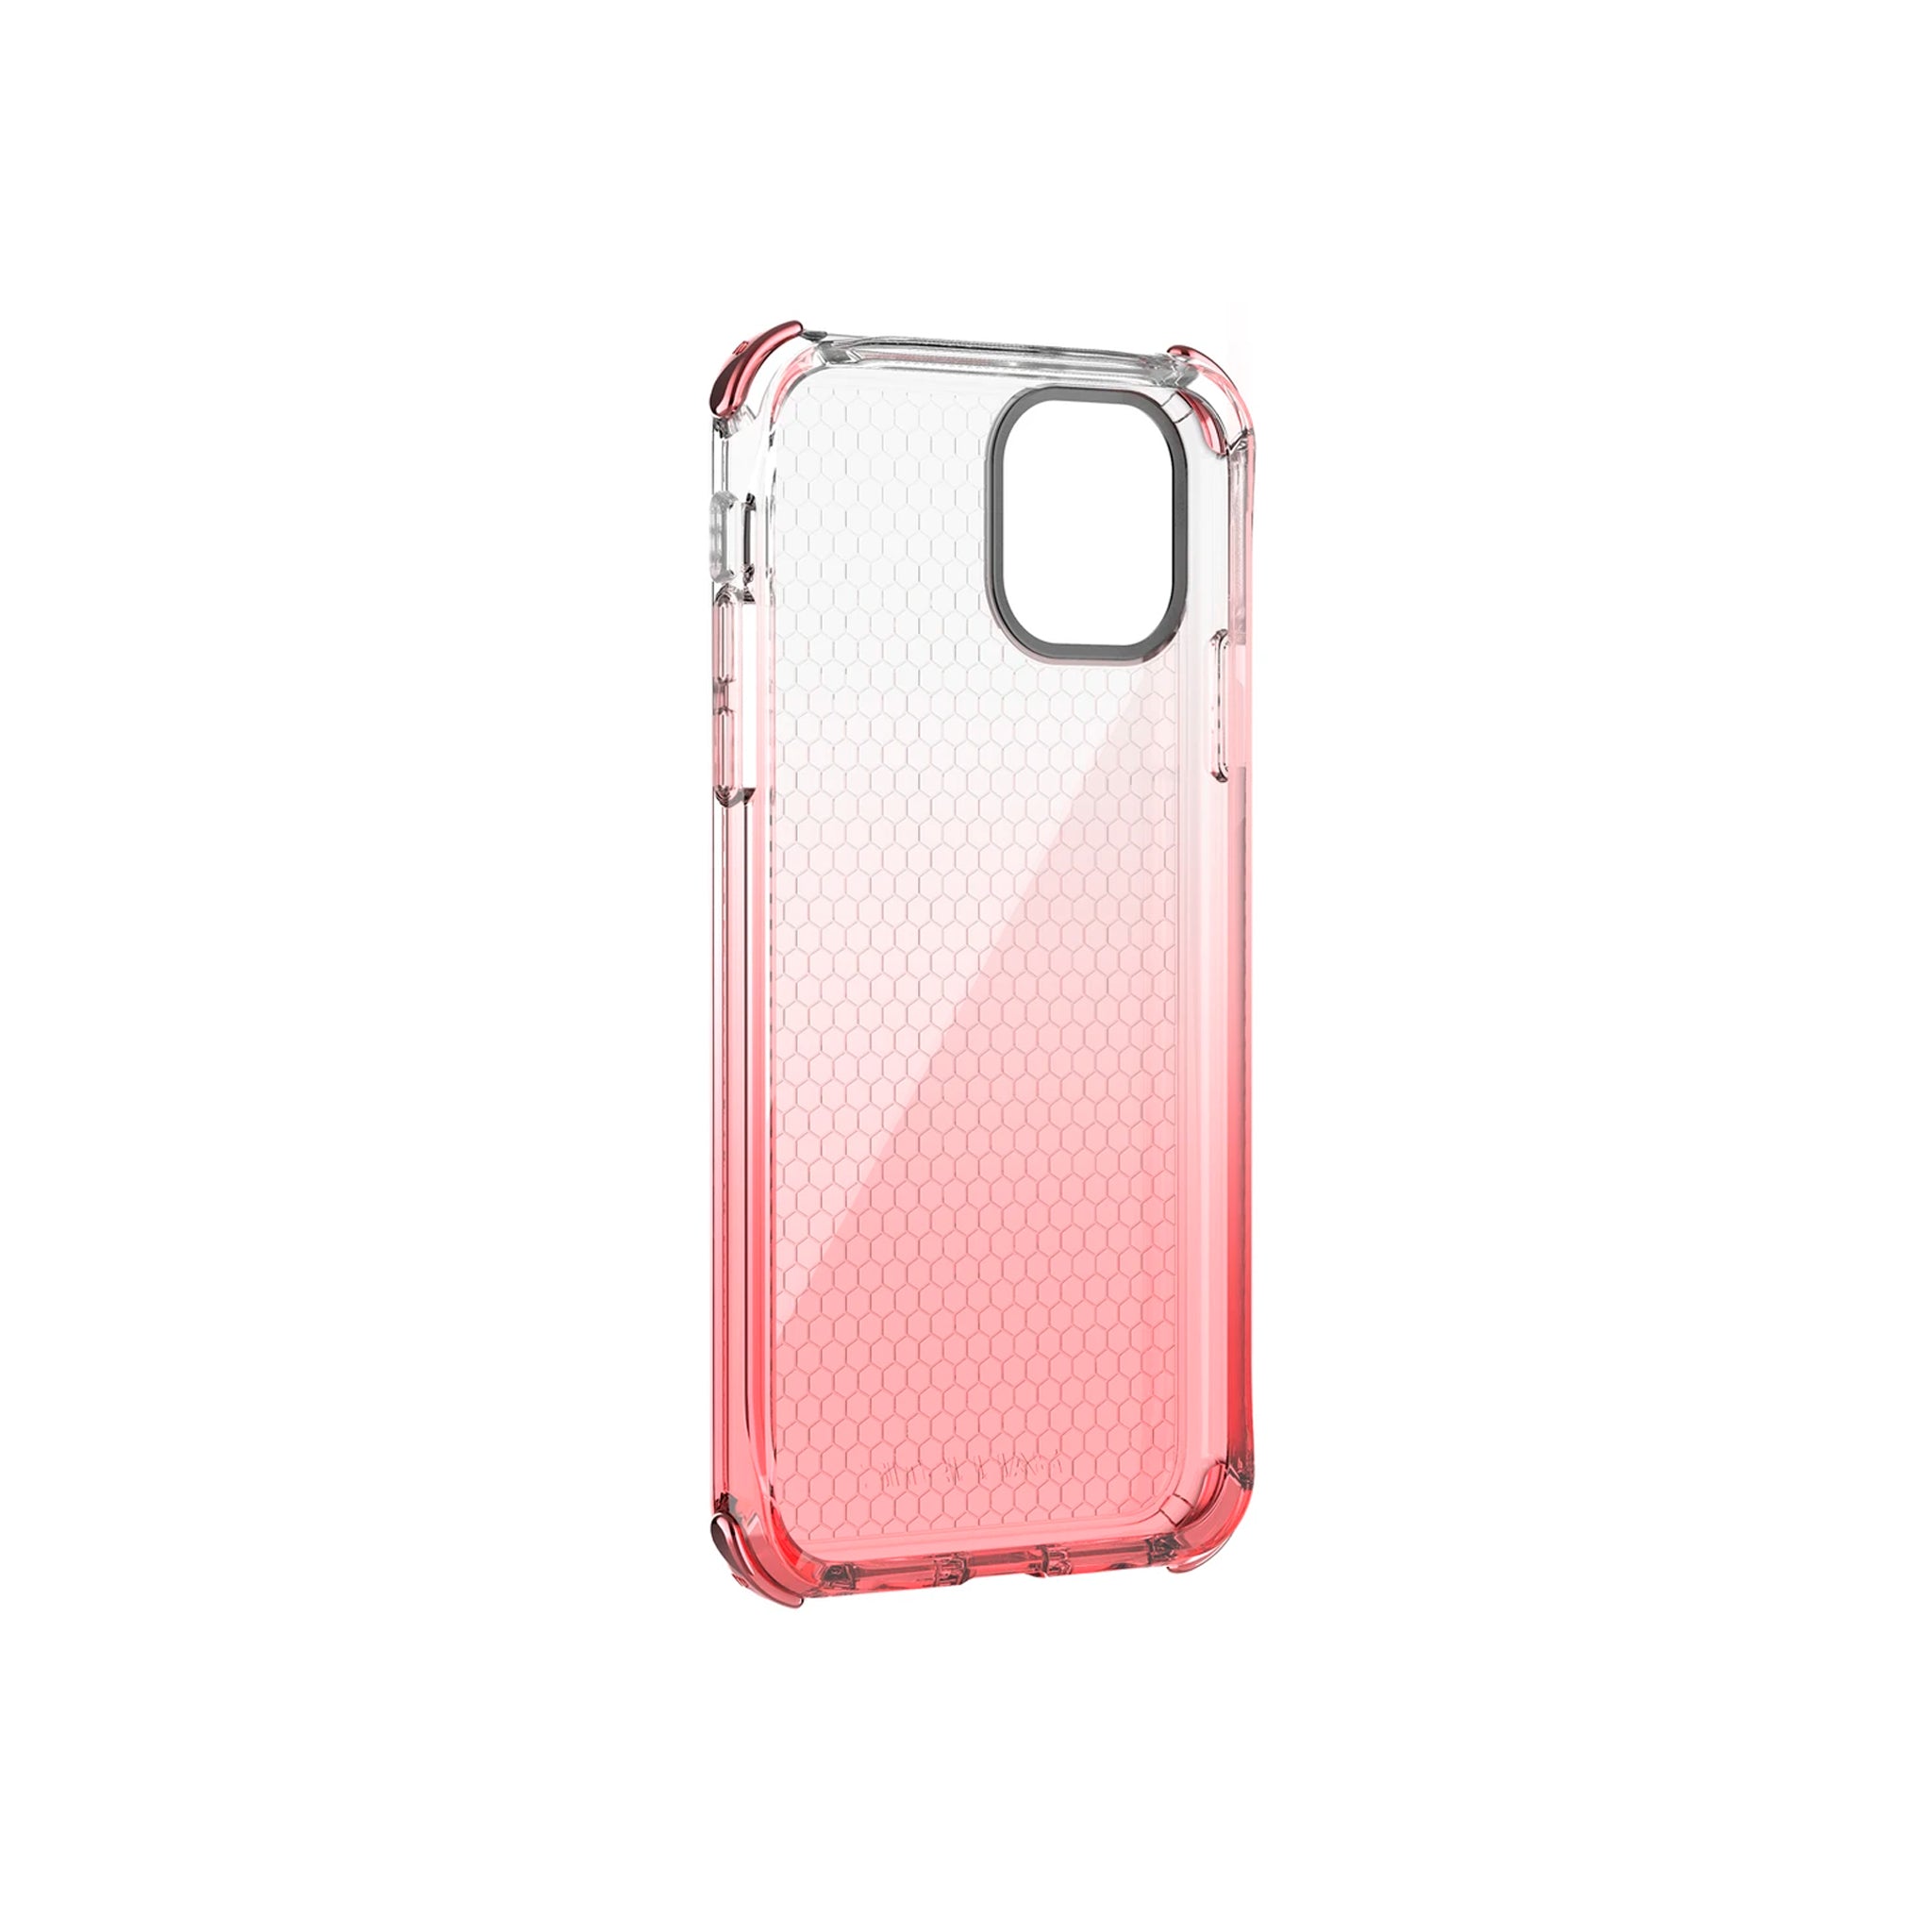 Ballistic - Jewel Spark Series For iPhone XR - Rose Gold